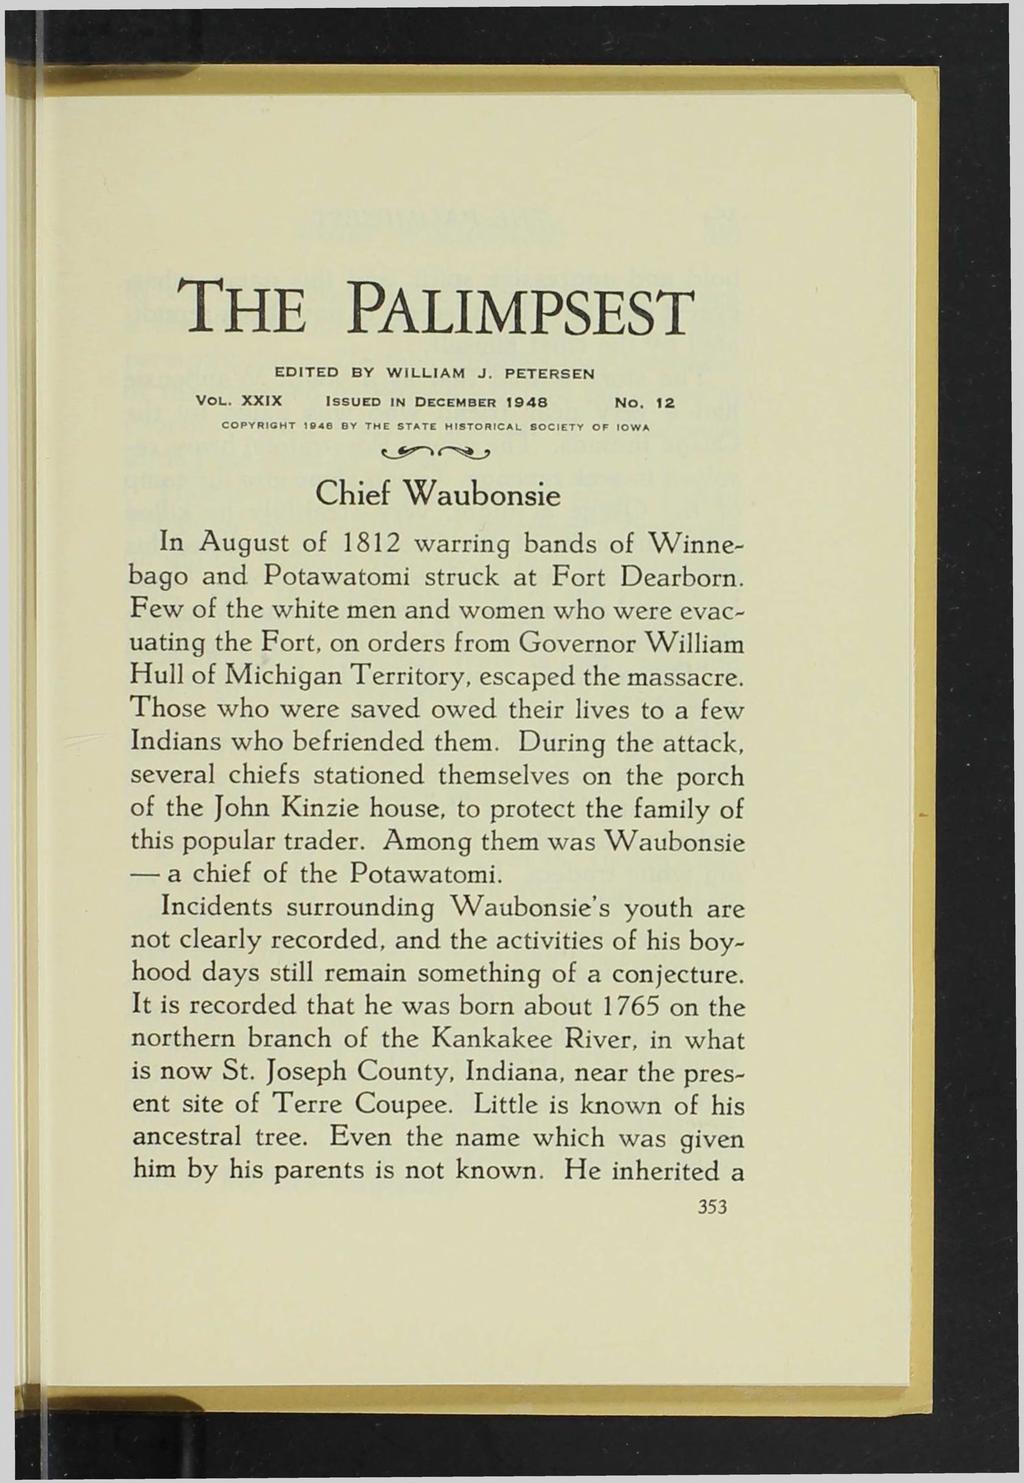 T h e Palim psest EDITED BY WILLIAM J. PETERSEN Vol. XXIX Issued in December 1948 No.